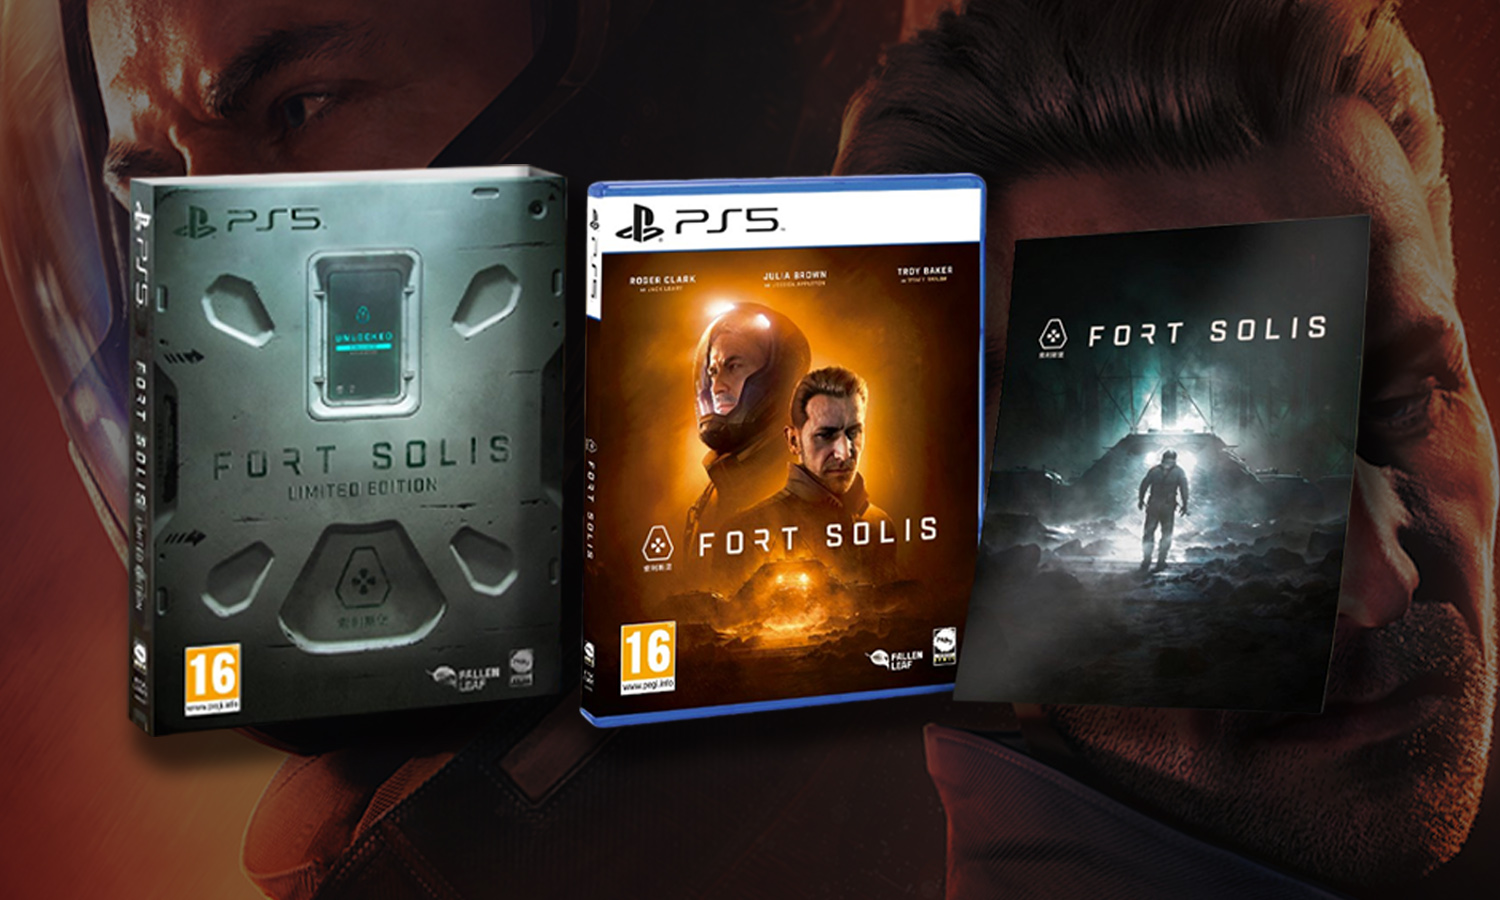 Fort Solis - Limited Edition (PS5)